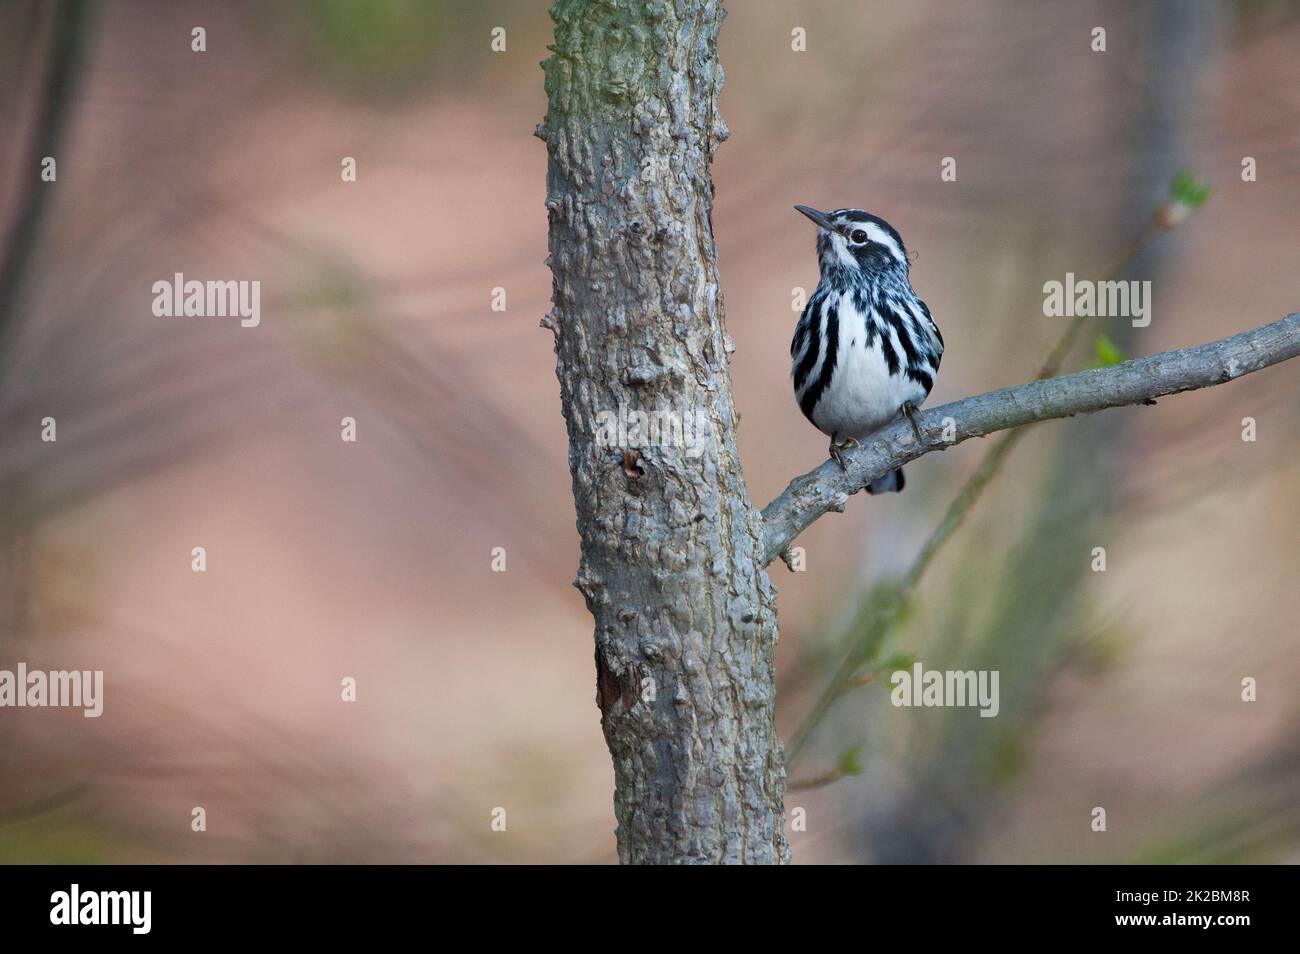 Black and White warbler during spring migration, Stock Photo